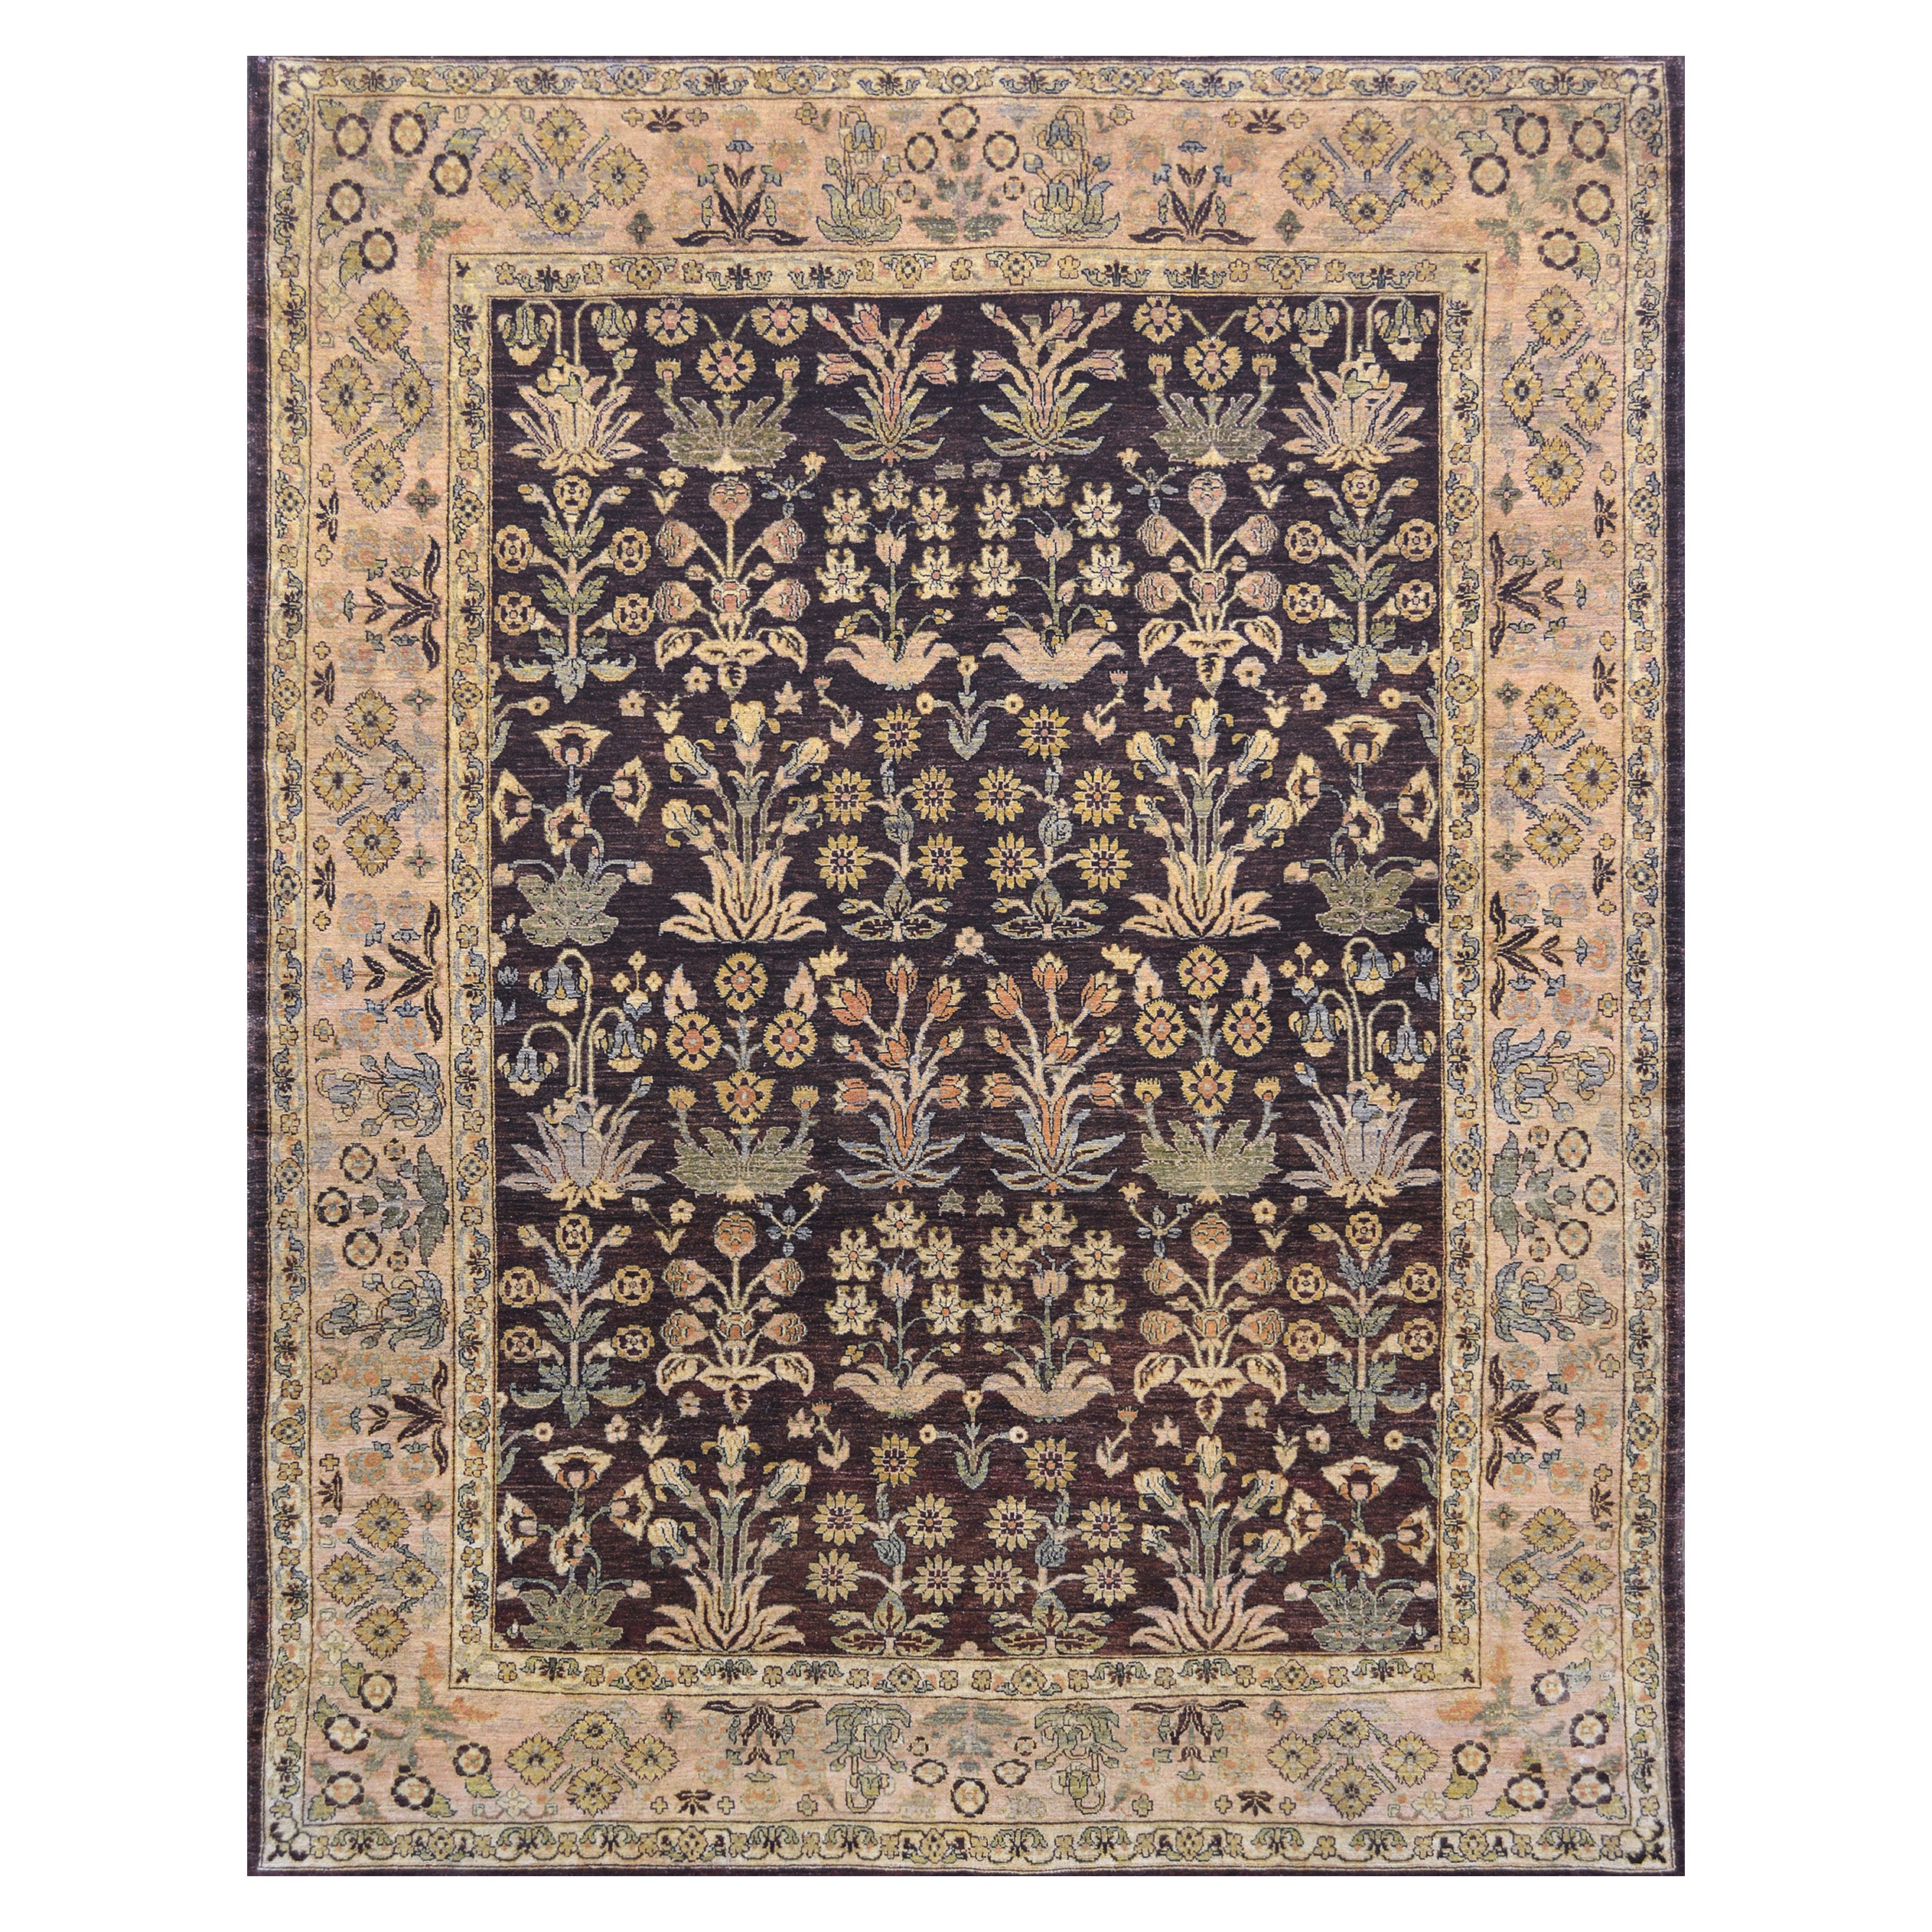 High Quality Agra Inspired Handwoven Wool Rug For Sale